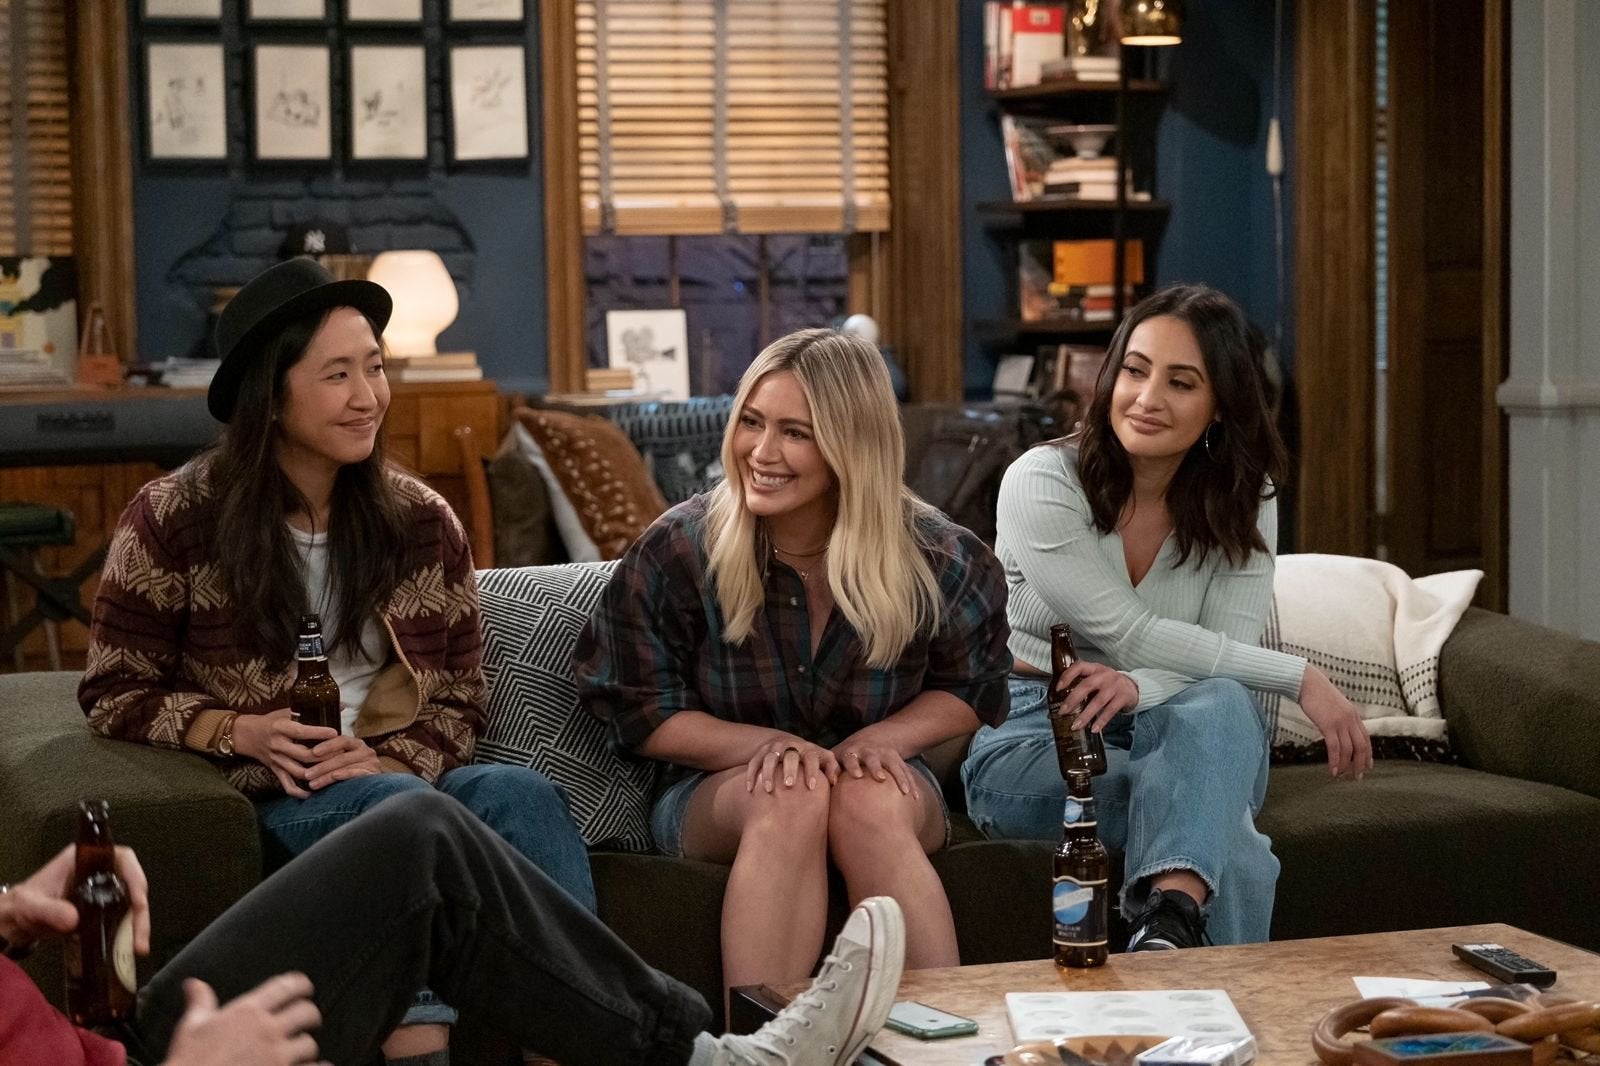 How I Met Your Father Episode 3 Review: “The Fixer” Might Be Onto Something